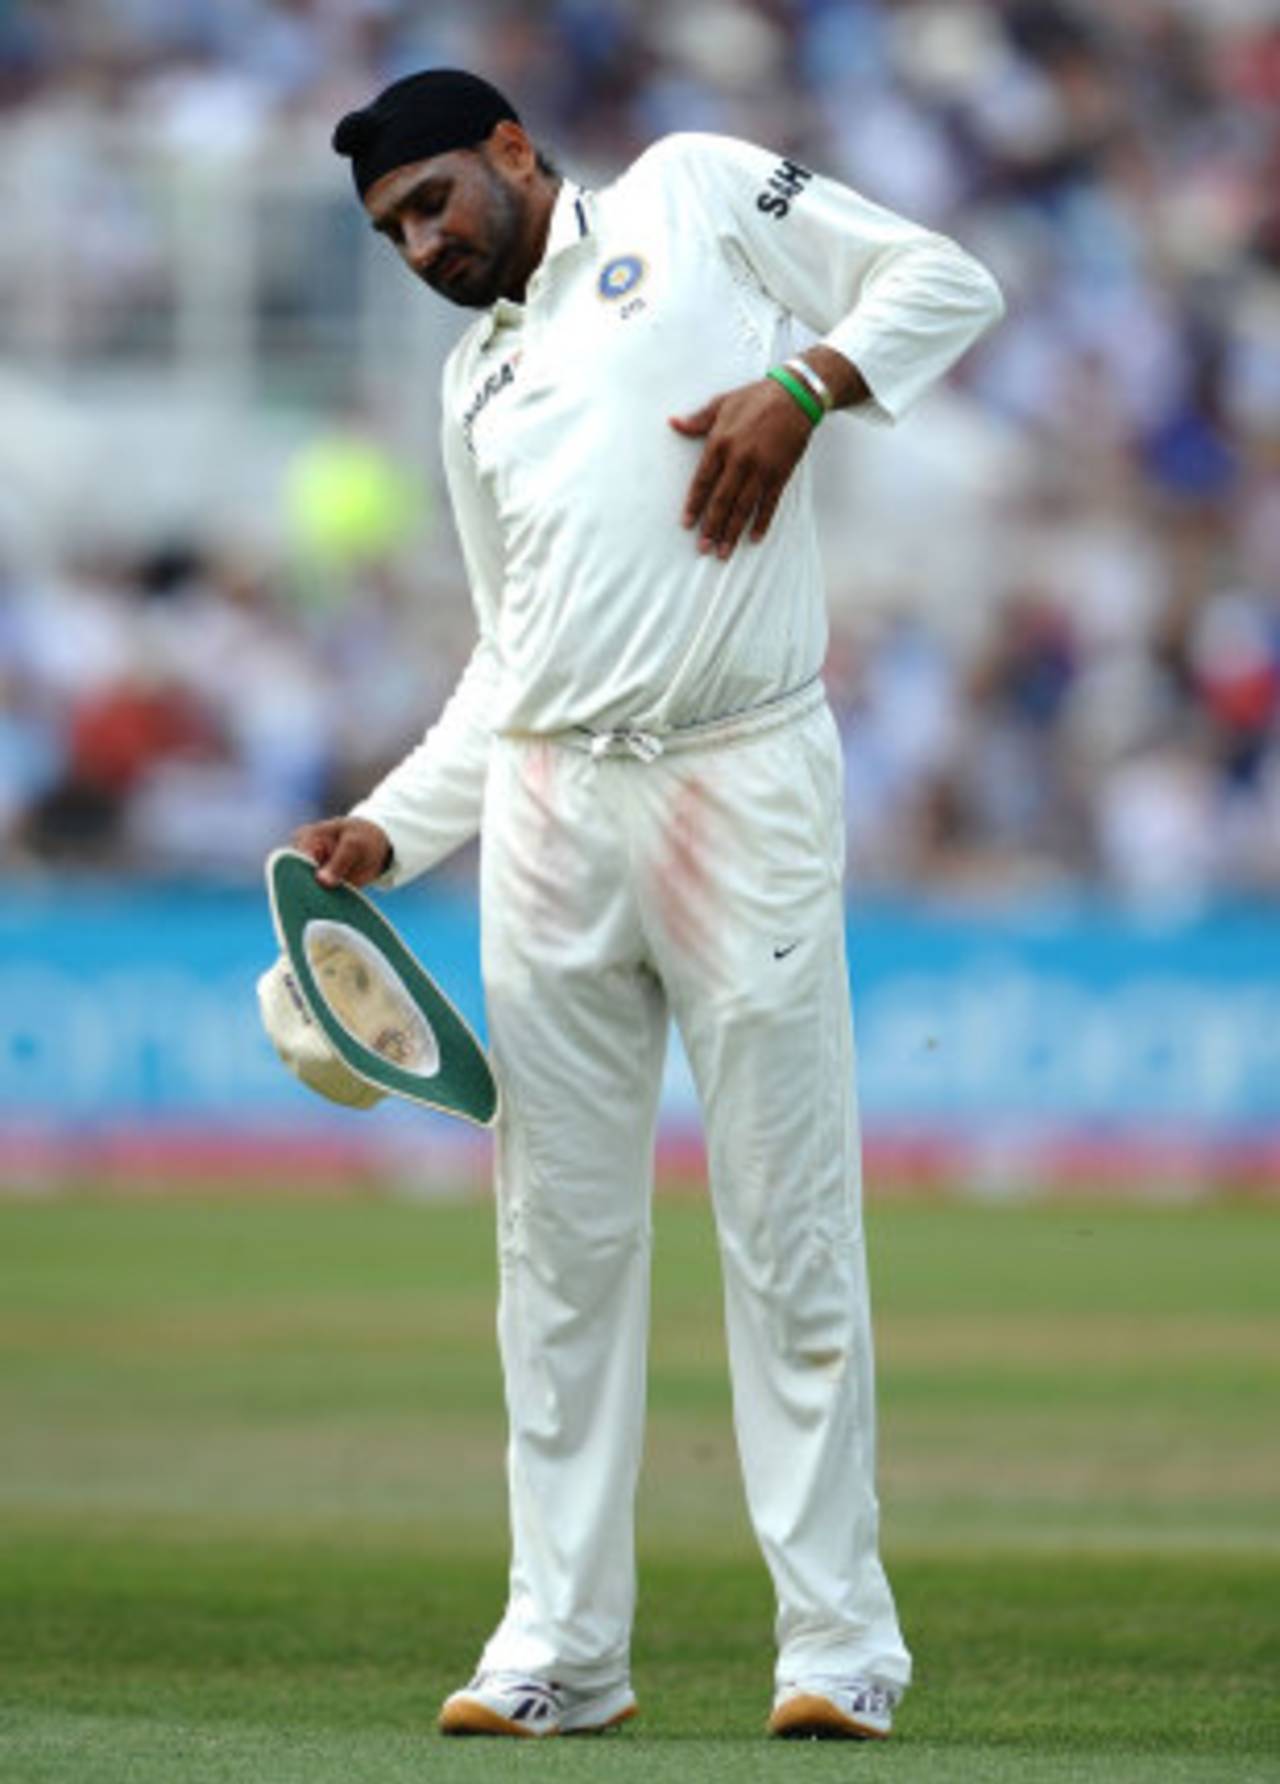 Harbhajan Singh left the field after feeling some discomfort, England v India, 2nd npower Test, Trent Bridge, 3rd day, July 31, 2011